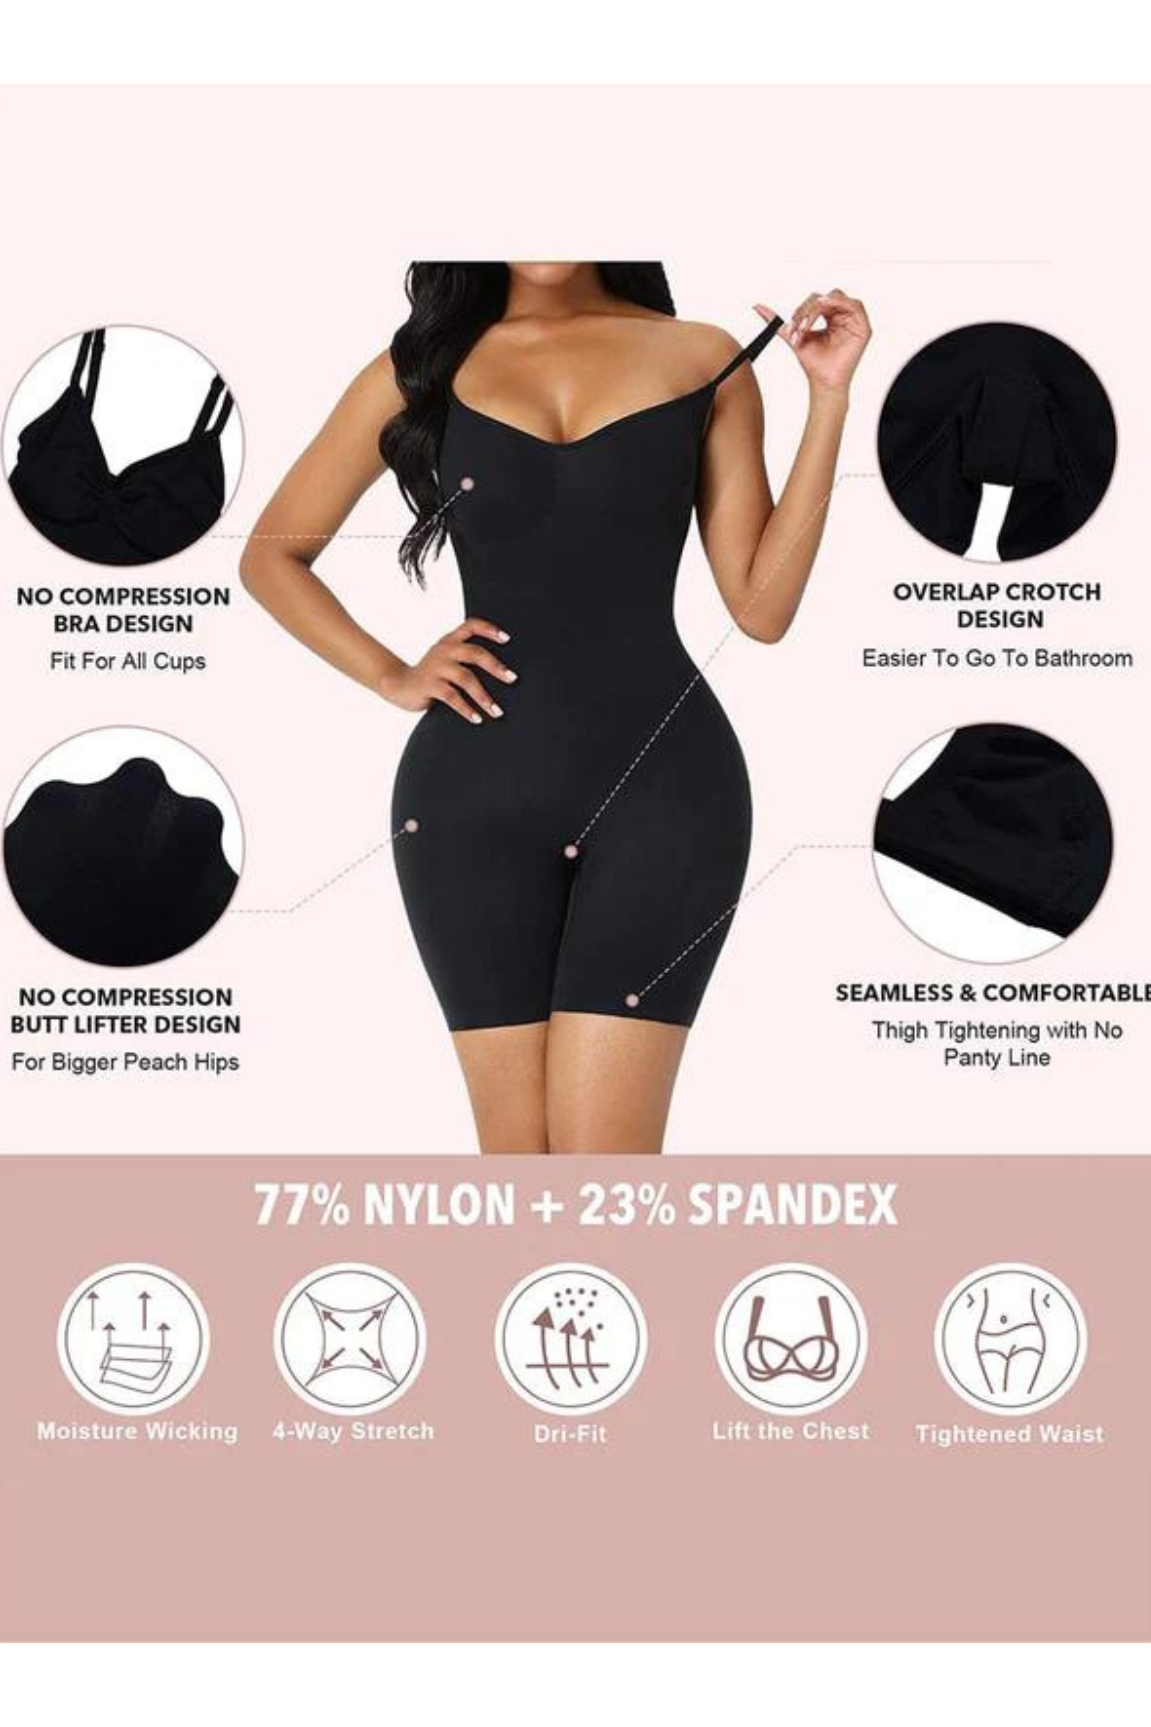 The Assistant Body Shaper